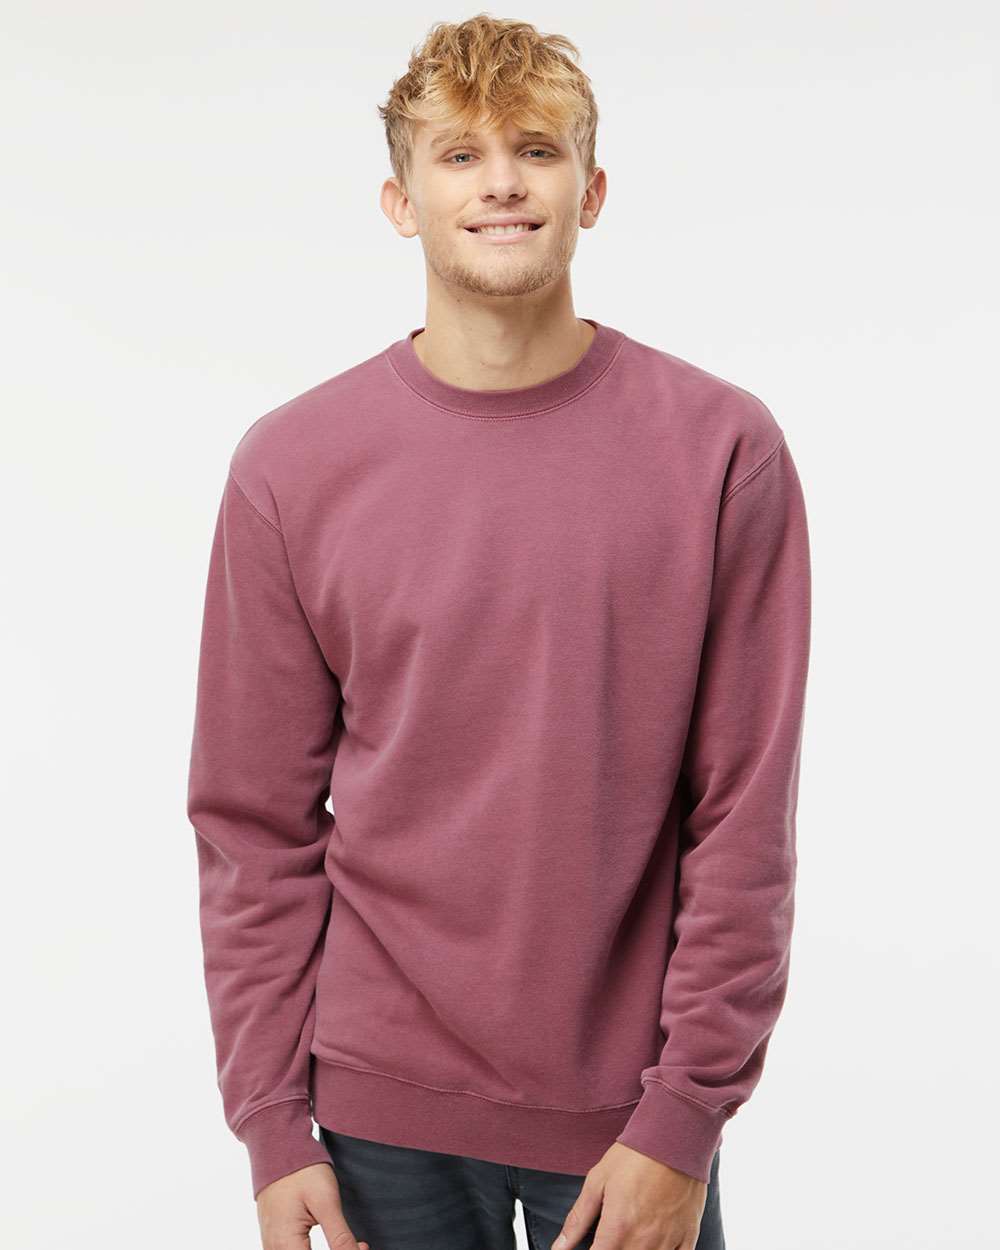 Independent Trading Co. Unisex Midweight Pigment-Dyed Crewneck Sweatshirt PRM3500 #colormdl_Pigment Maroon